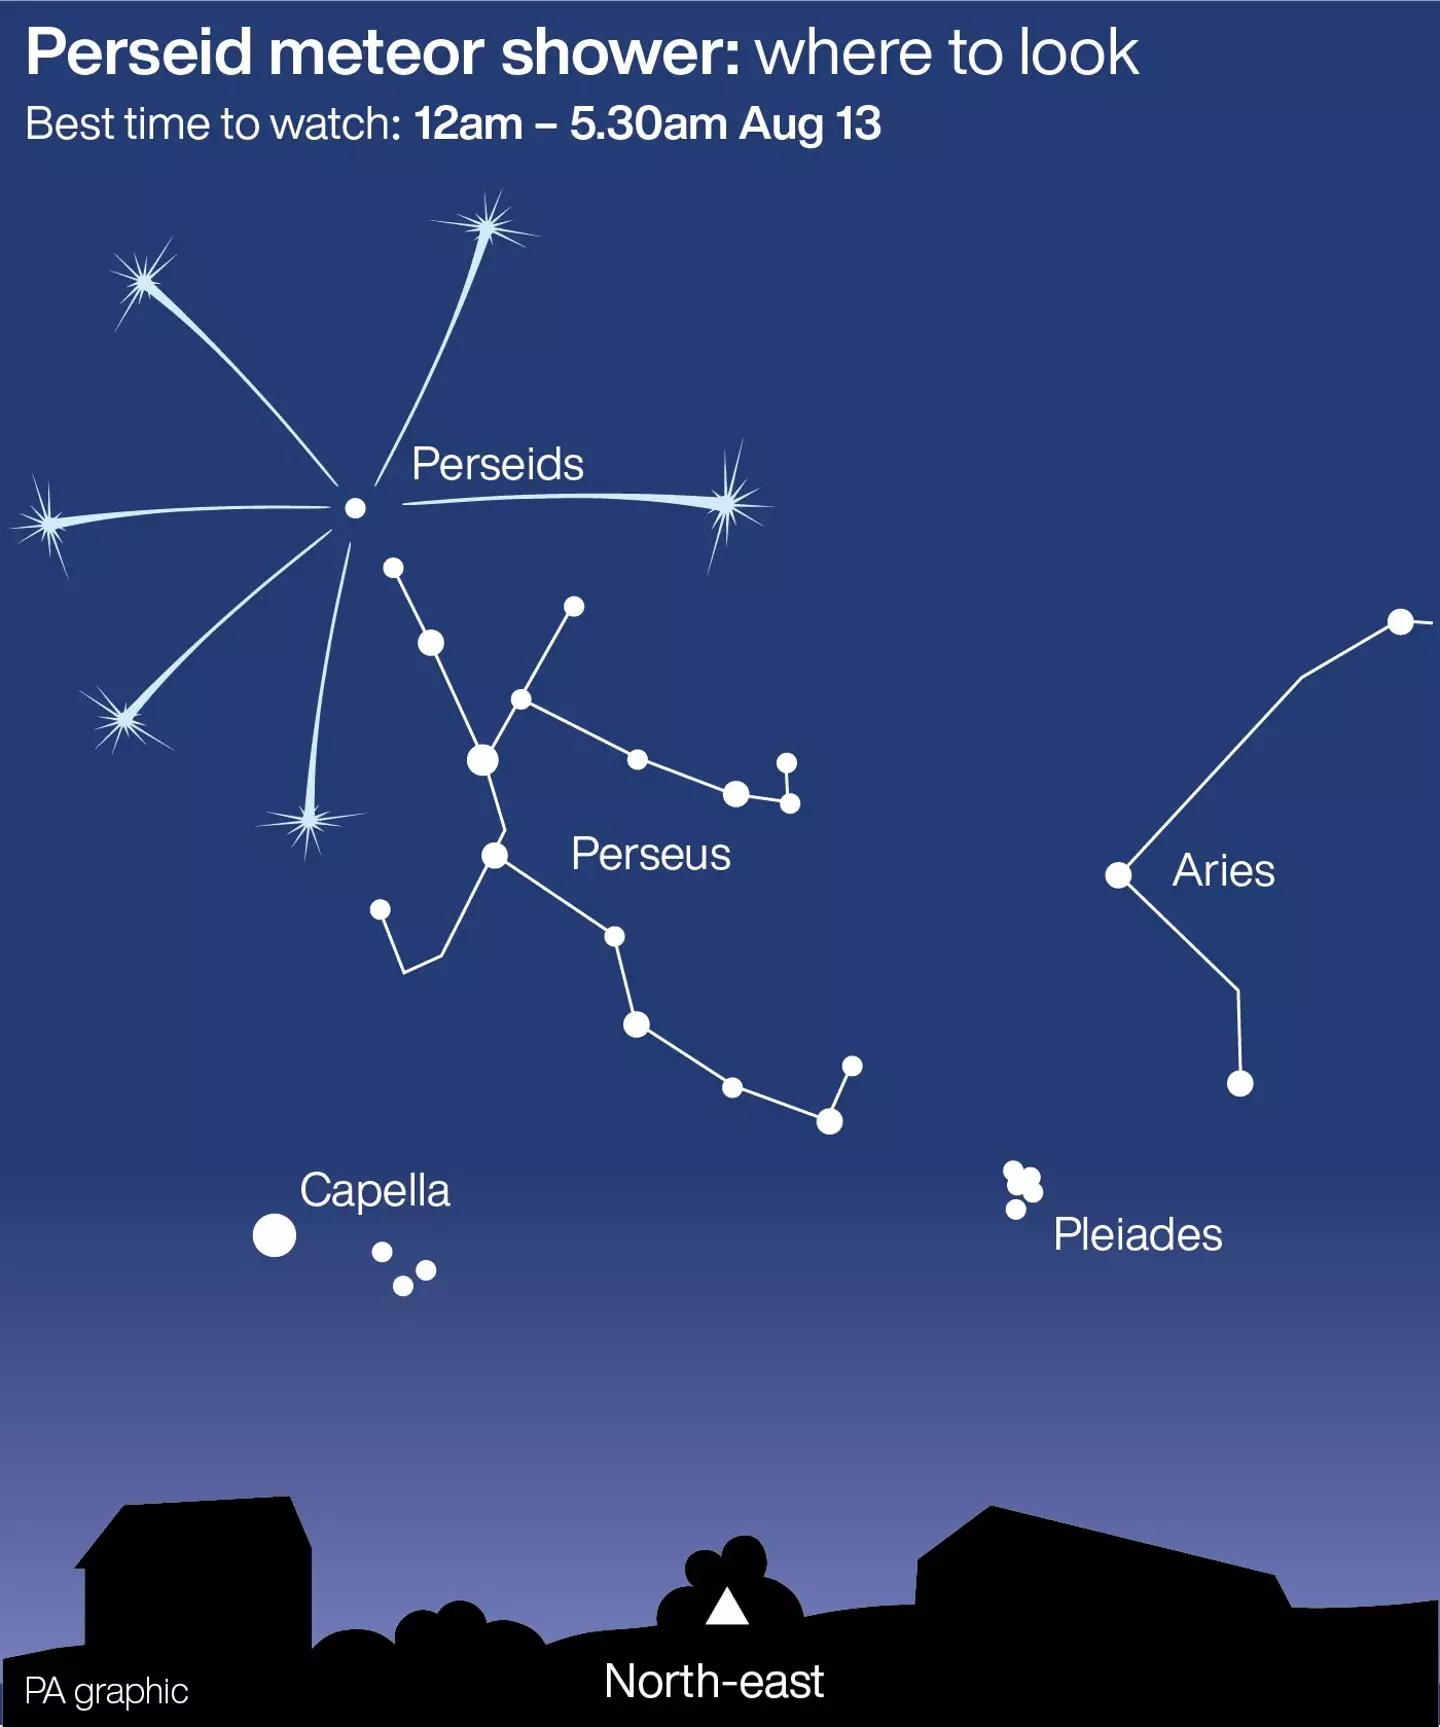 There are a number of factors that might increase your changes of spotting the meteors.